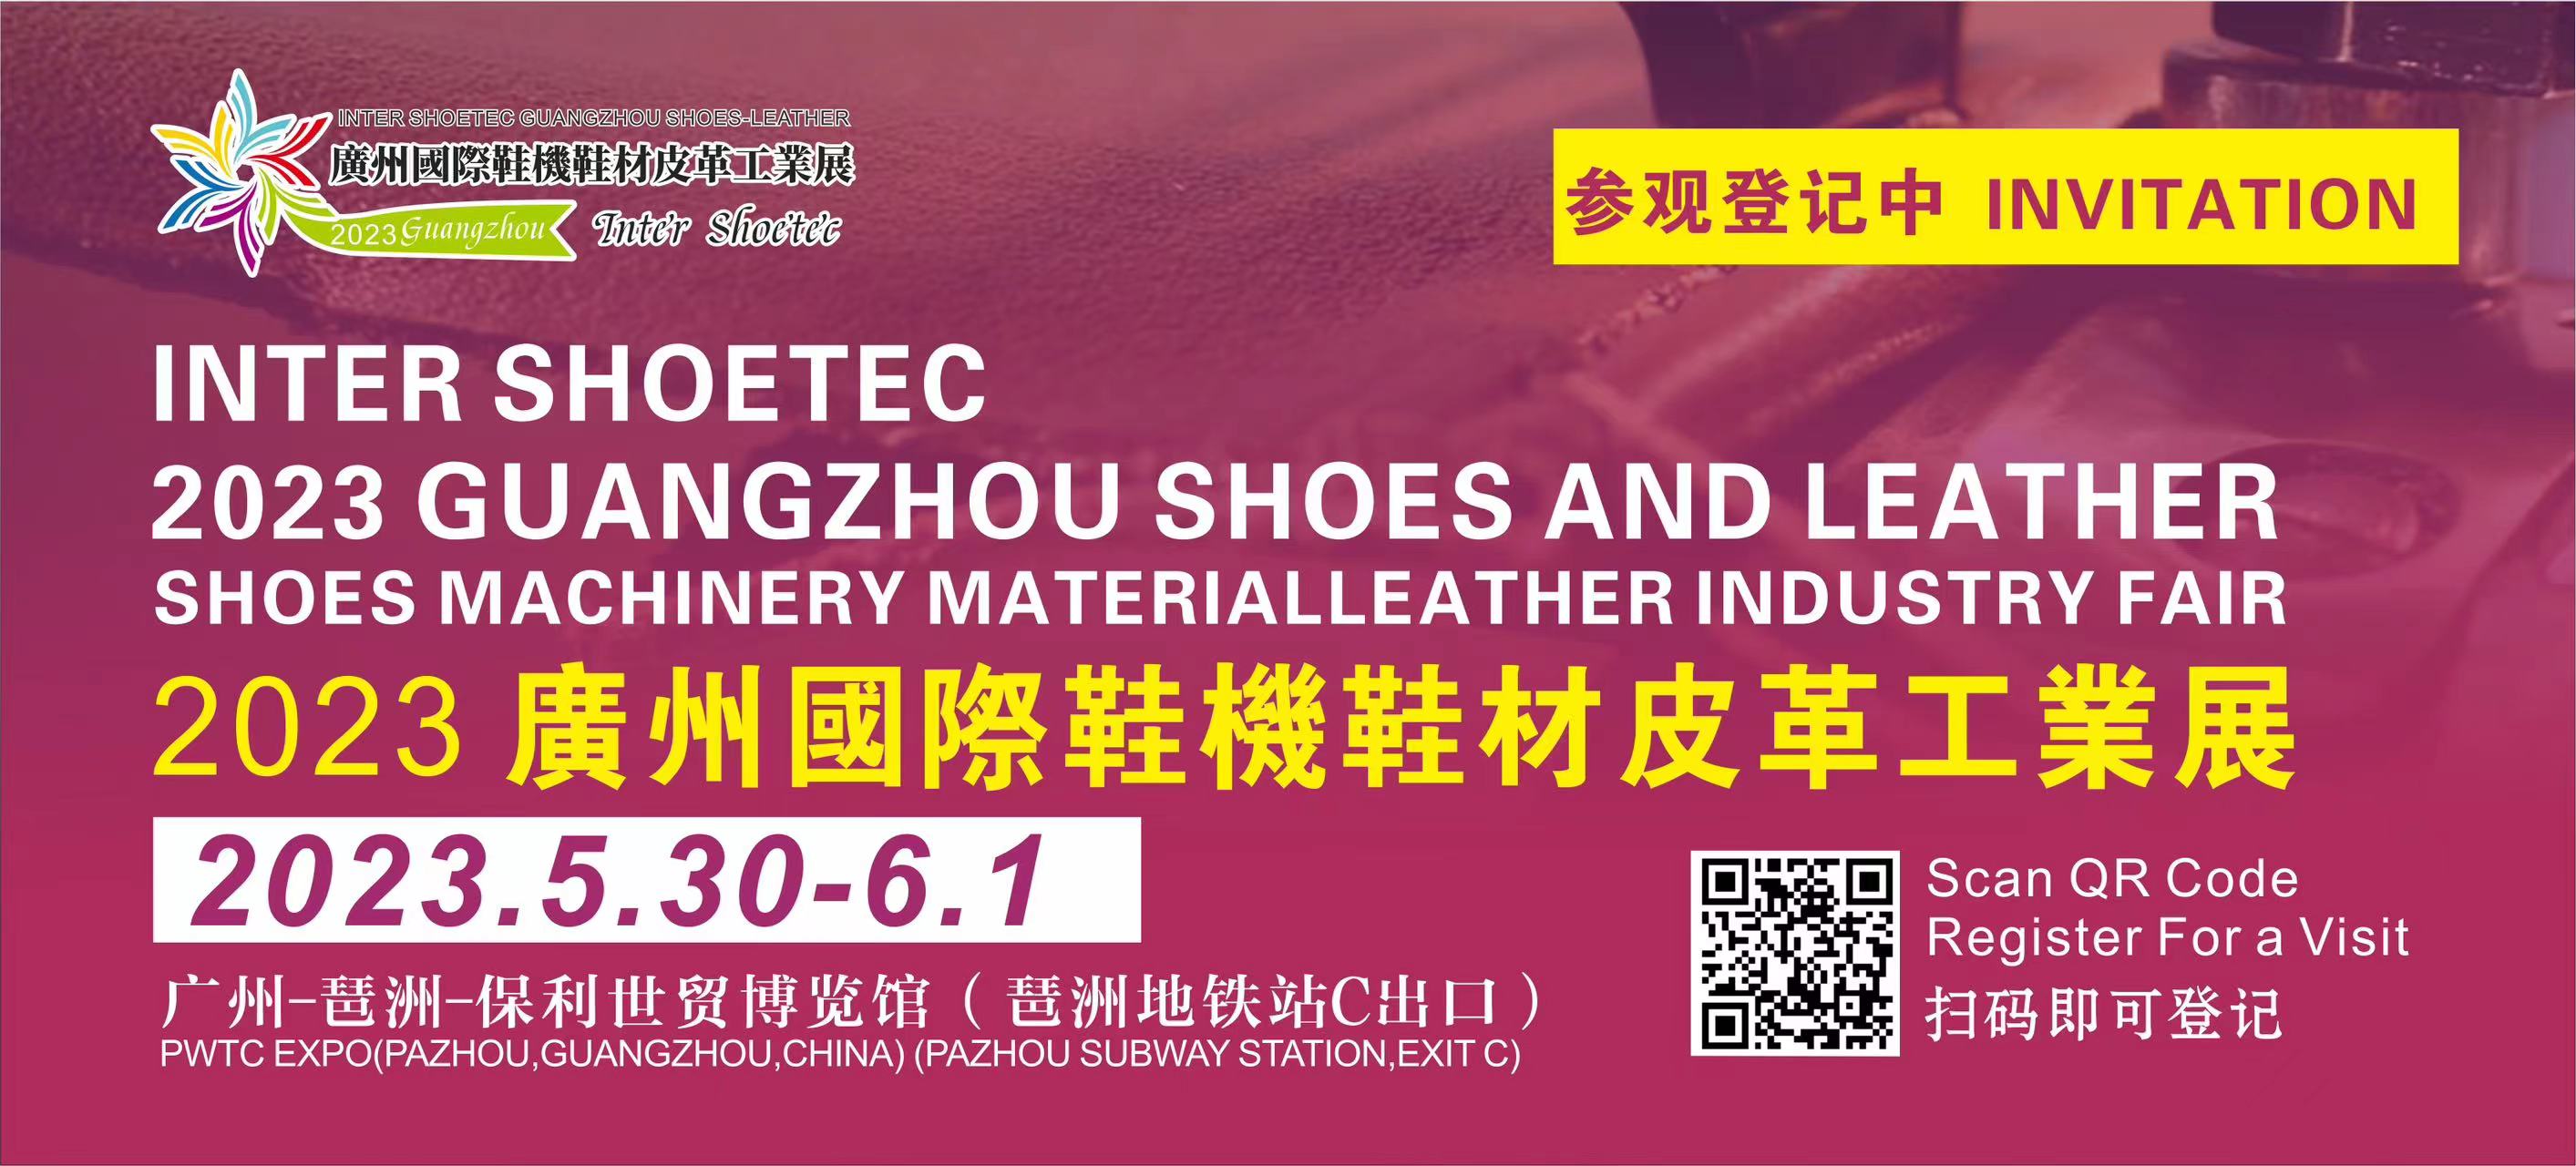 2023 GUANGZHOU SHOES AND LEATHER SHOES MACHINERY MATERIALLEATHER INDUSTRY FAIR